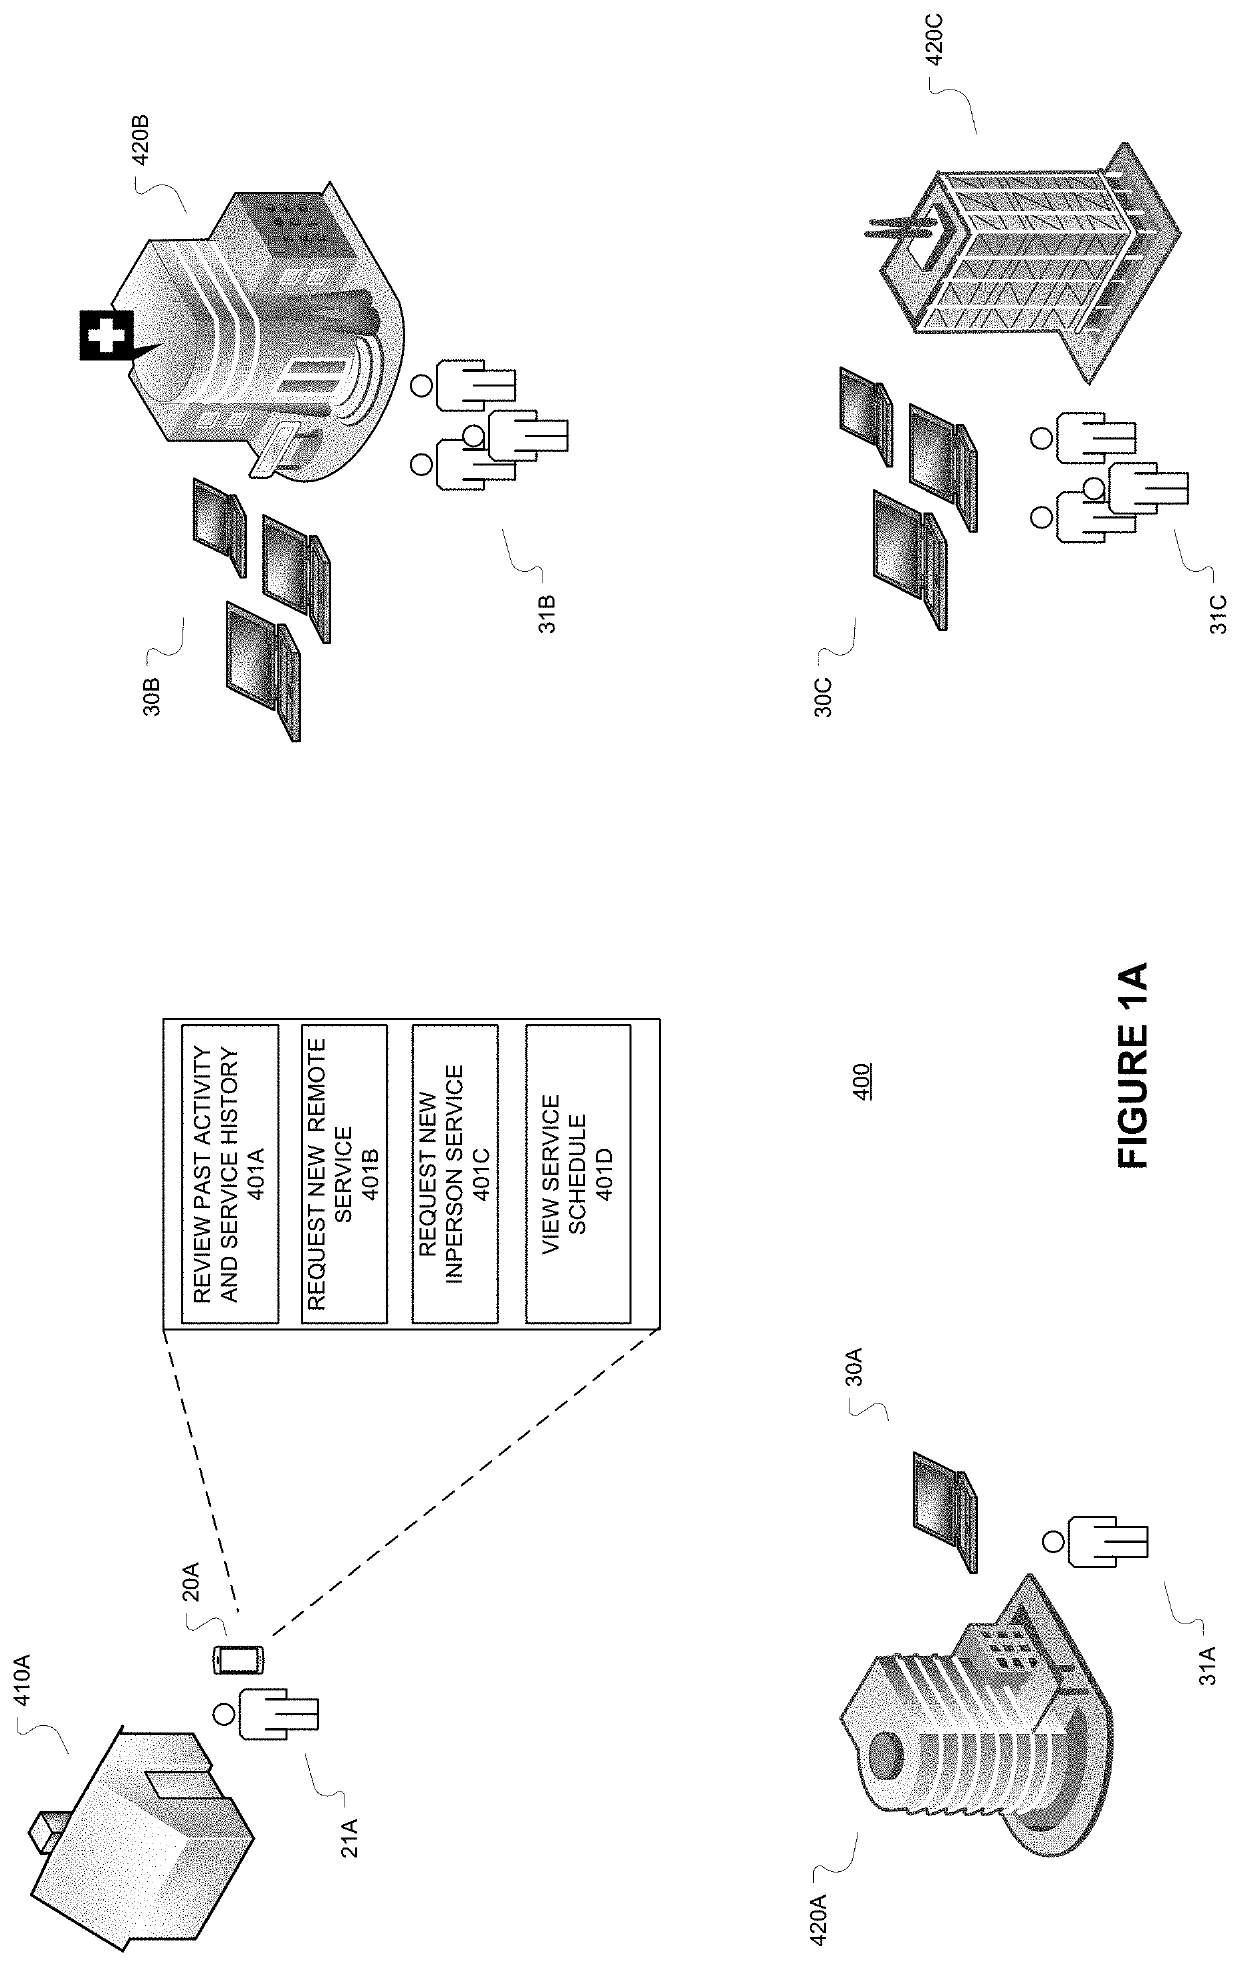 Integrated service provider and patient interaction platform for remote and in-person consultations